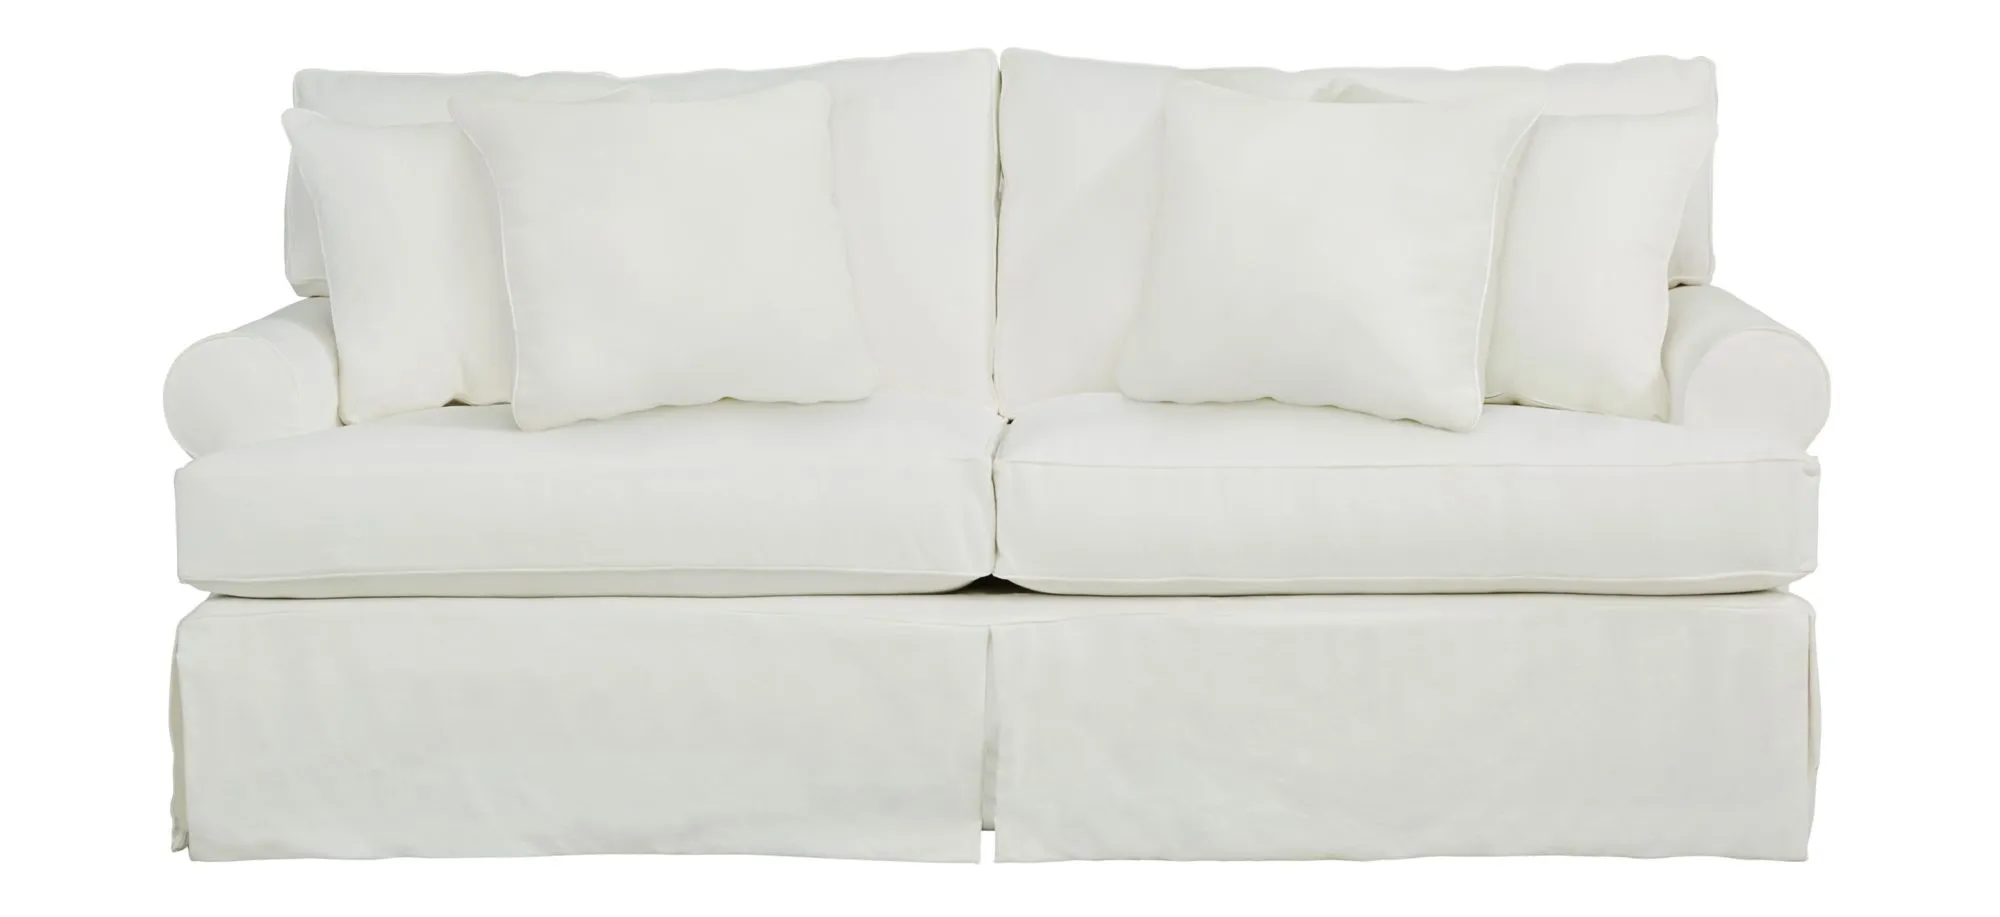 Lakeside Sofa in Homerun Bleached White by H.M. Richards